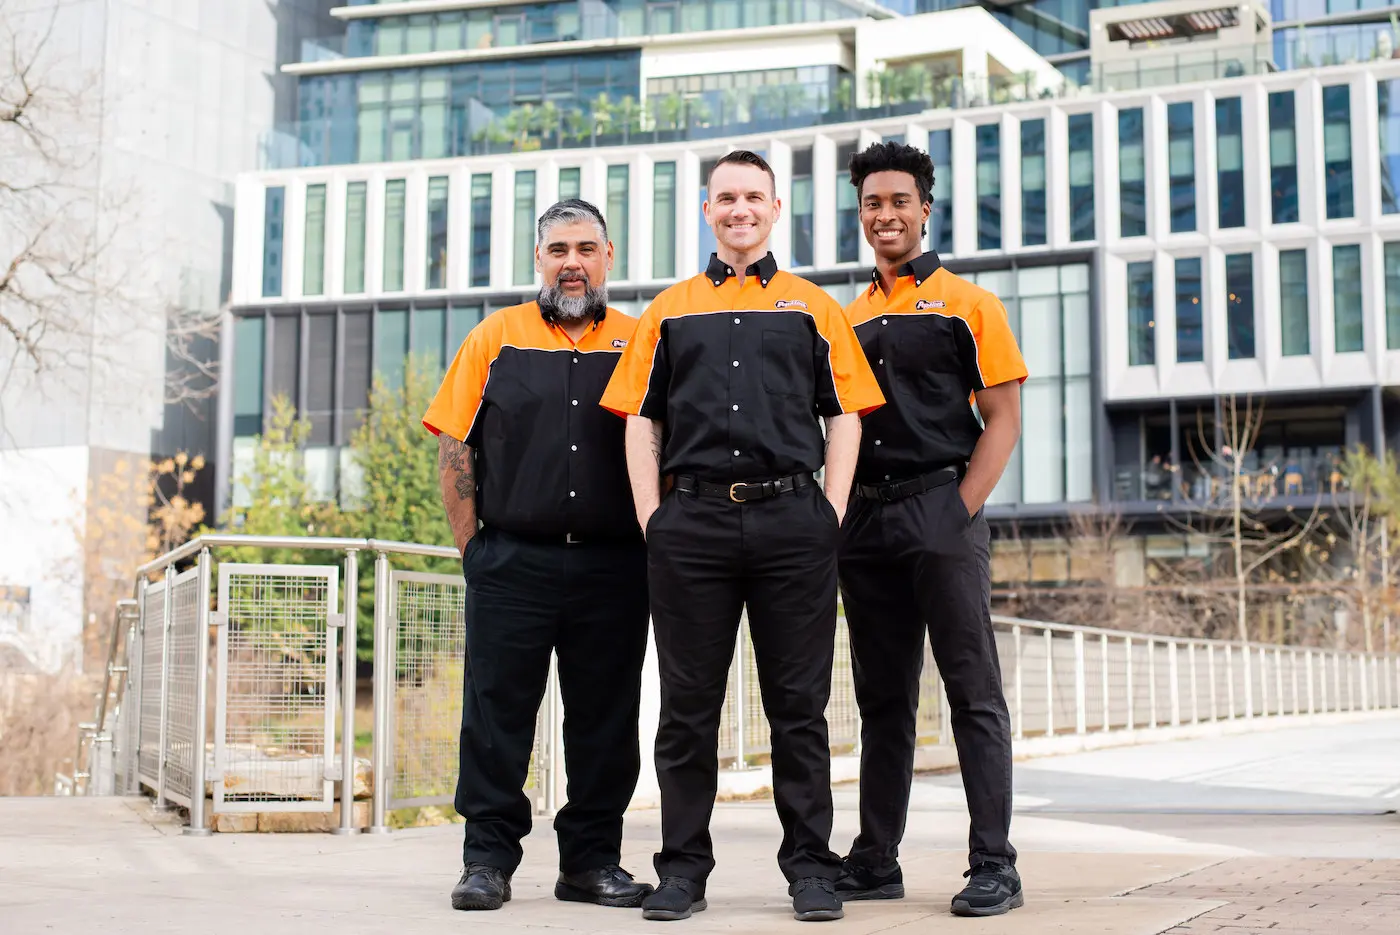 Three commercial locksmith technicians from Pop-A-Lock Metairie standing in front of an office building in the city.